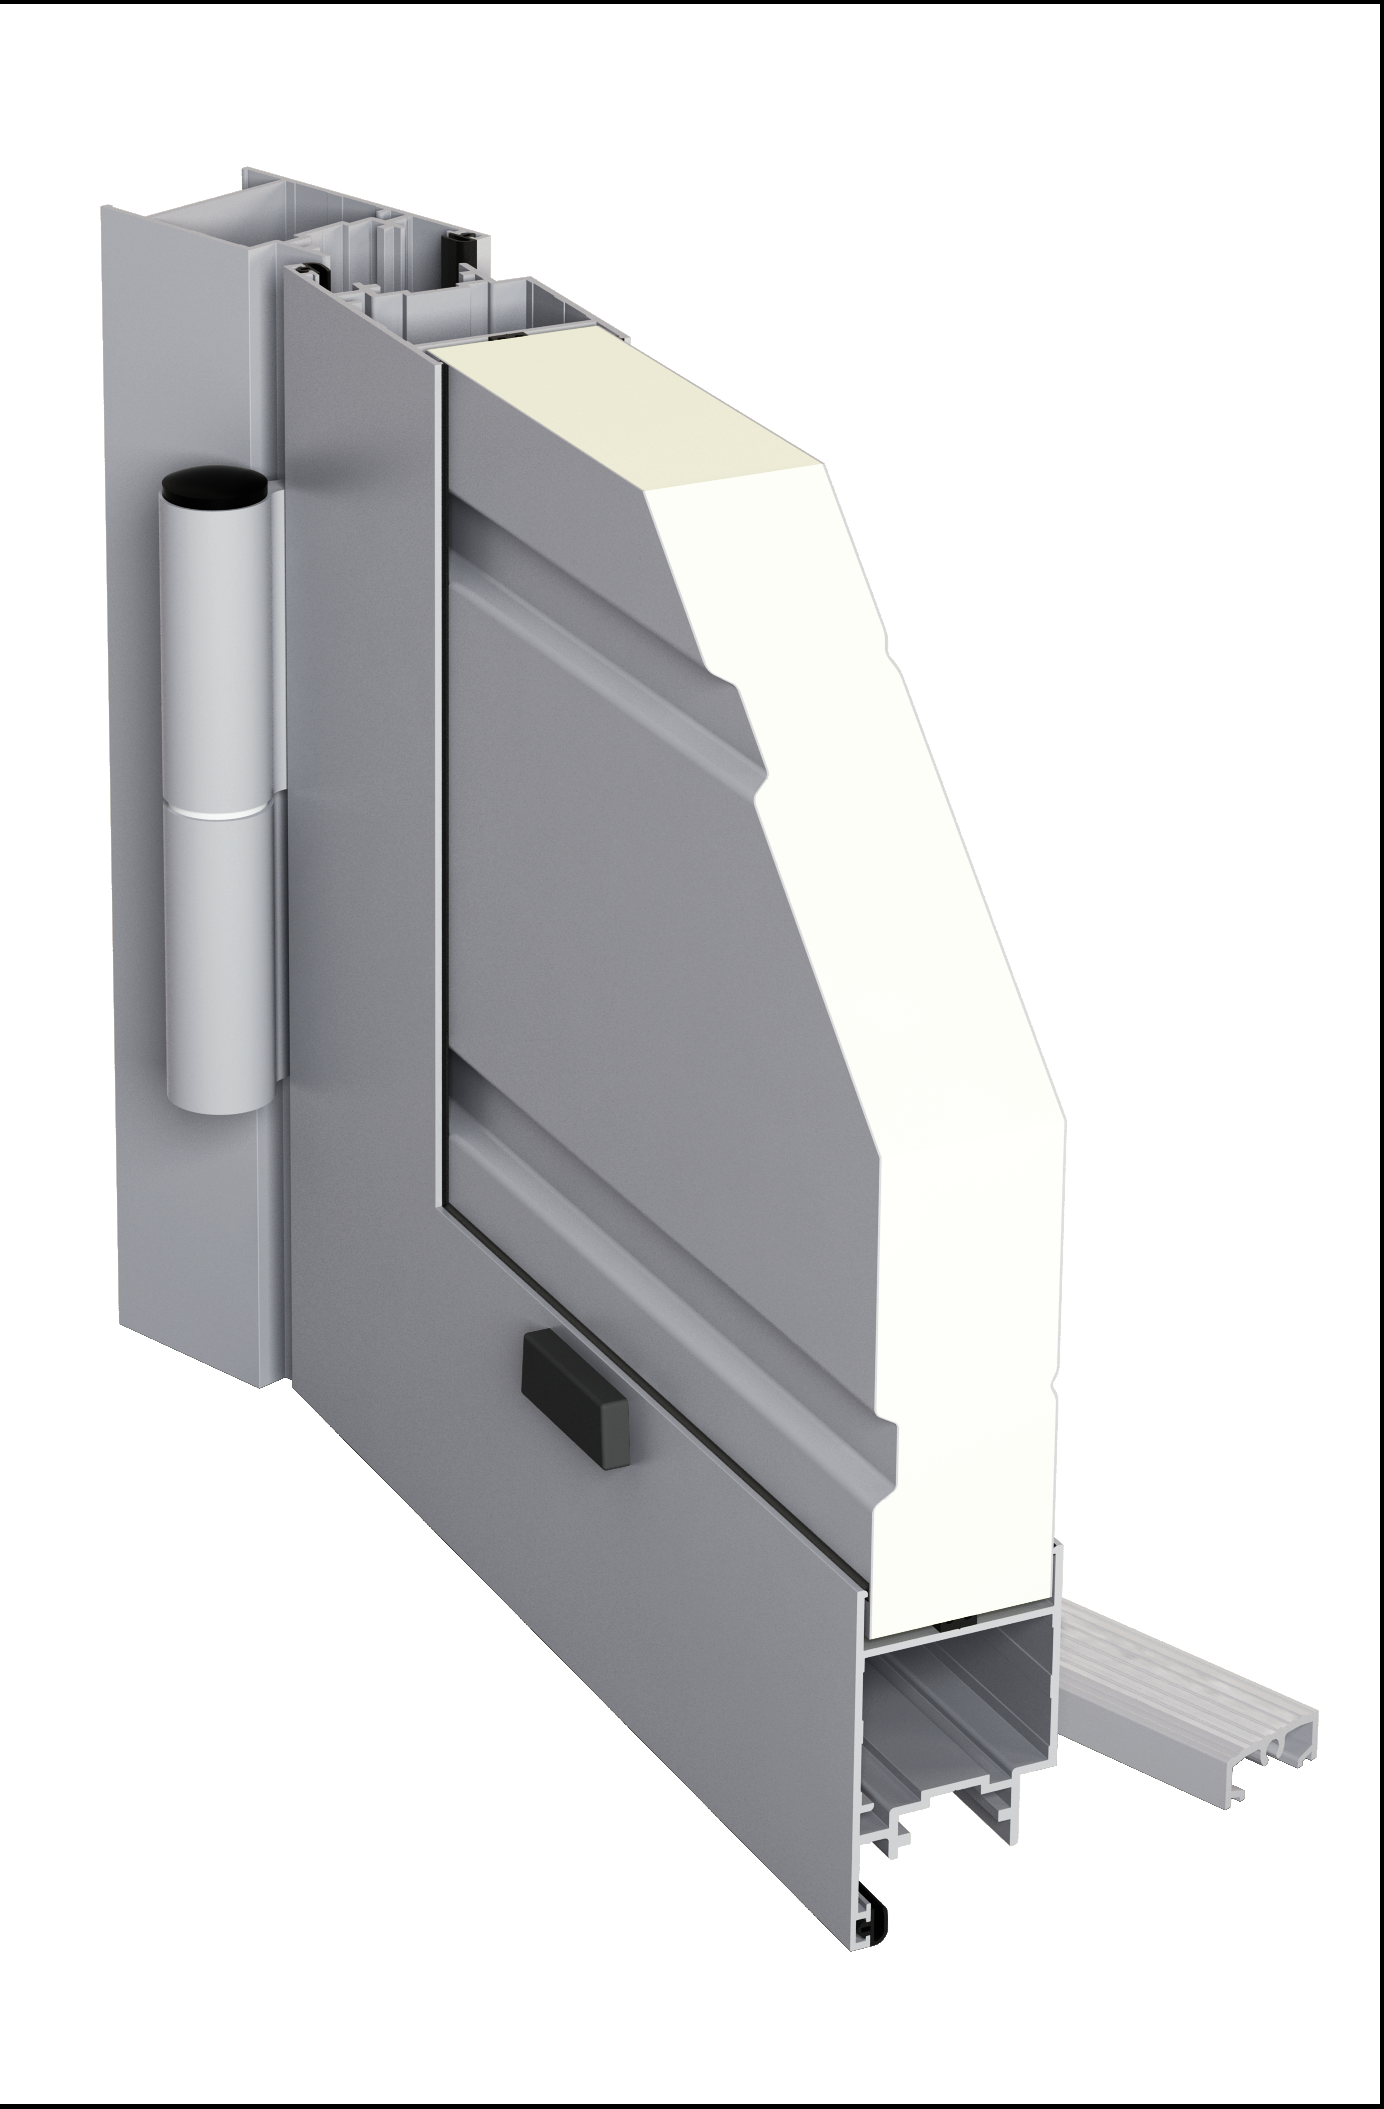 Profile of side hinged panel